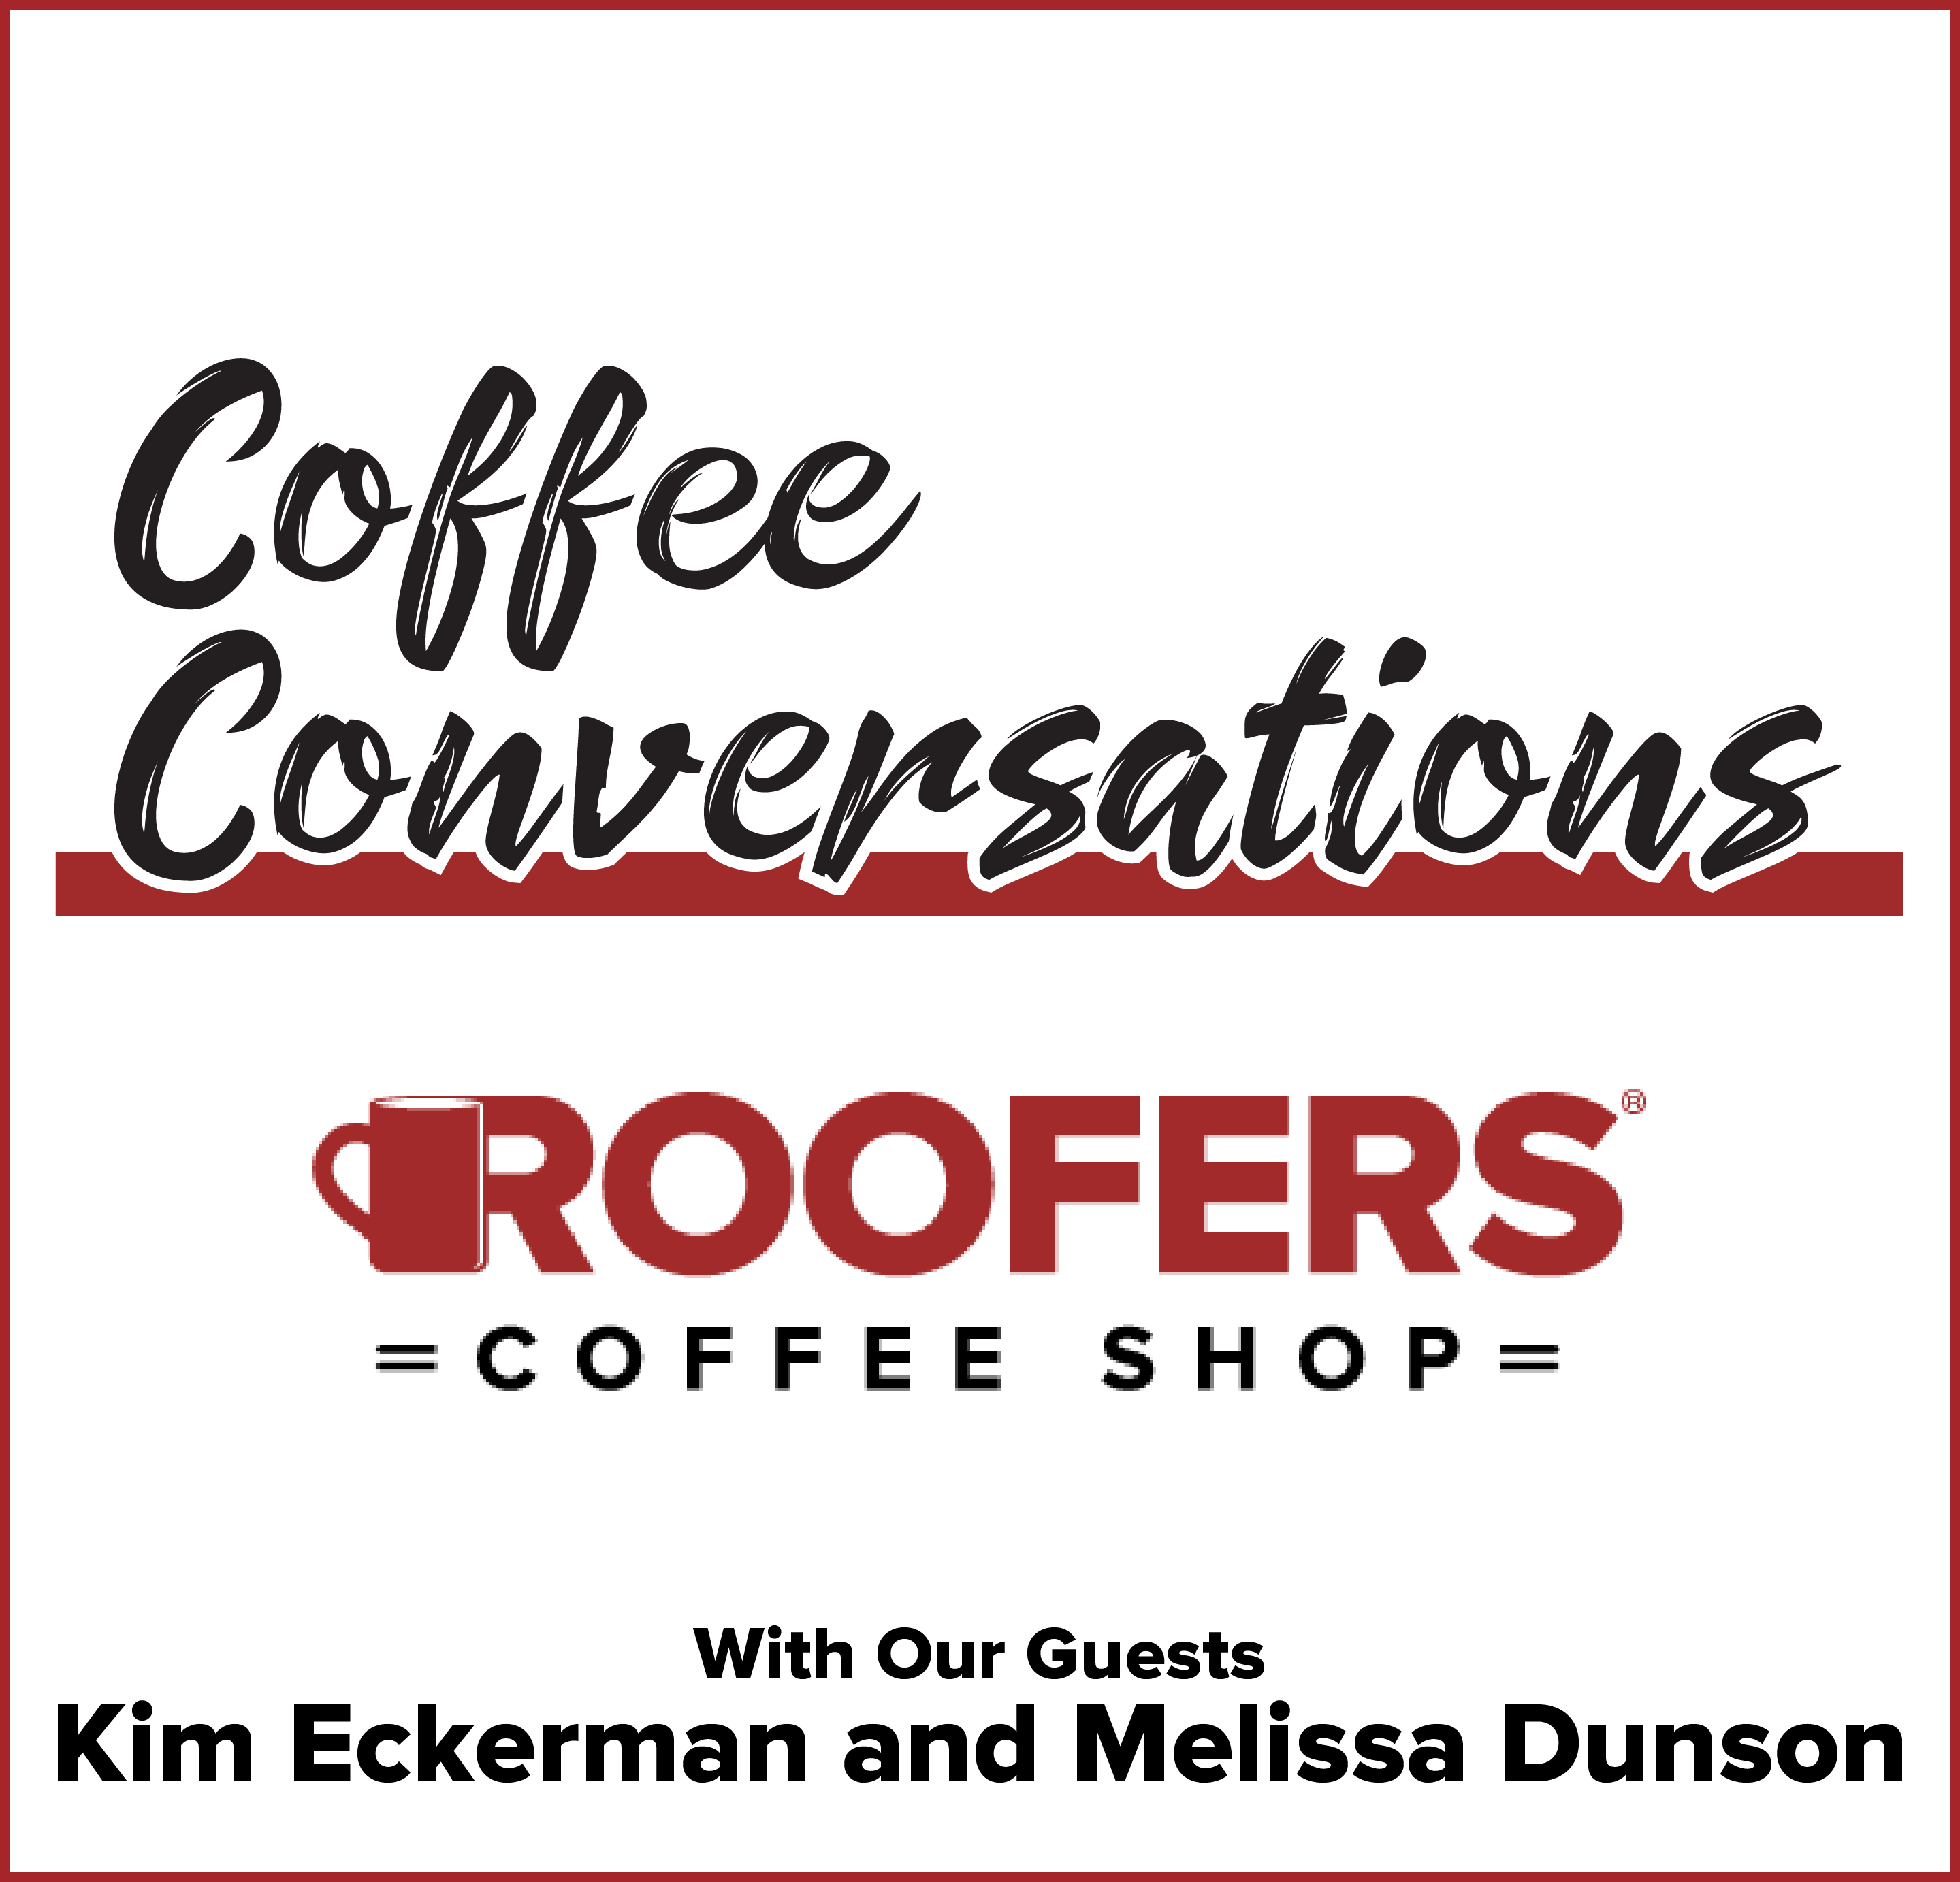 TAMKO -  Coffee Conversations with With Kim Eckerman and Melissa Dunson of TAMKO!